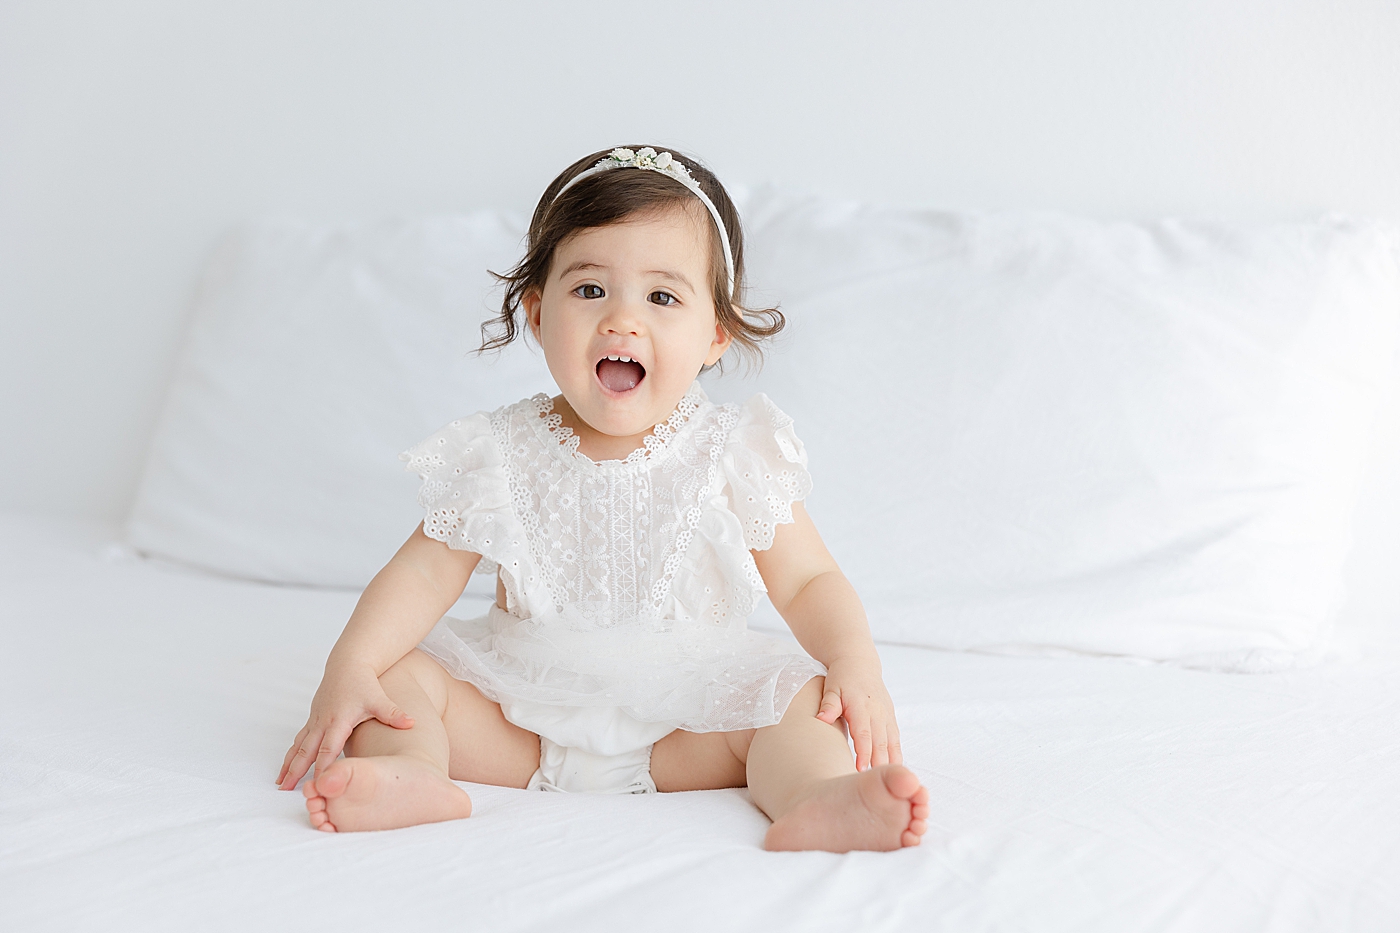 Baby girl in a white dress making a surprised face | Image by Sana Ahmed Photography